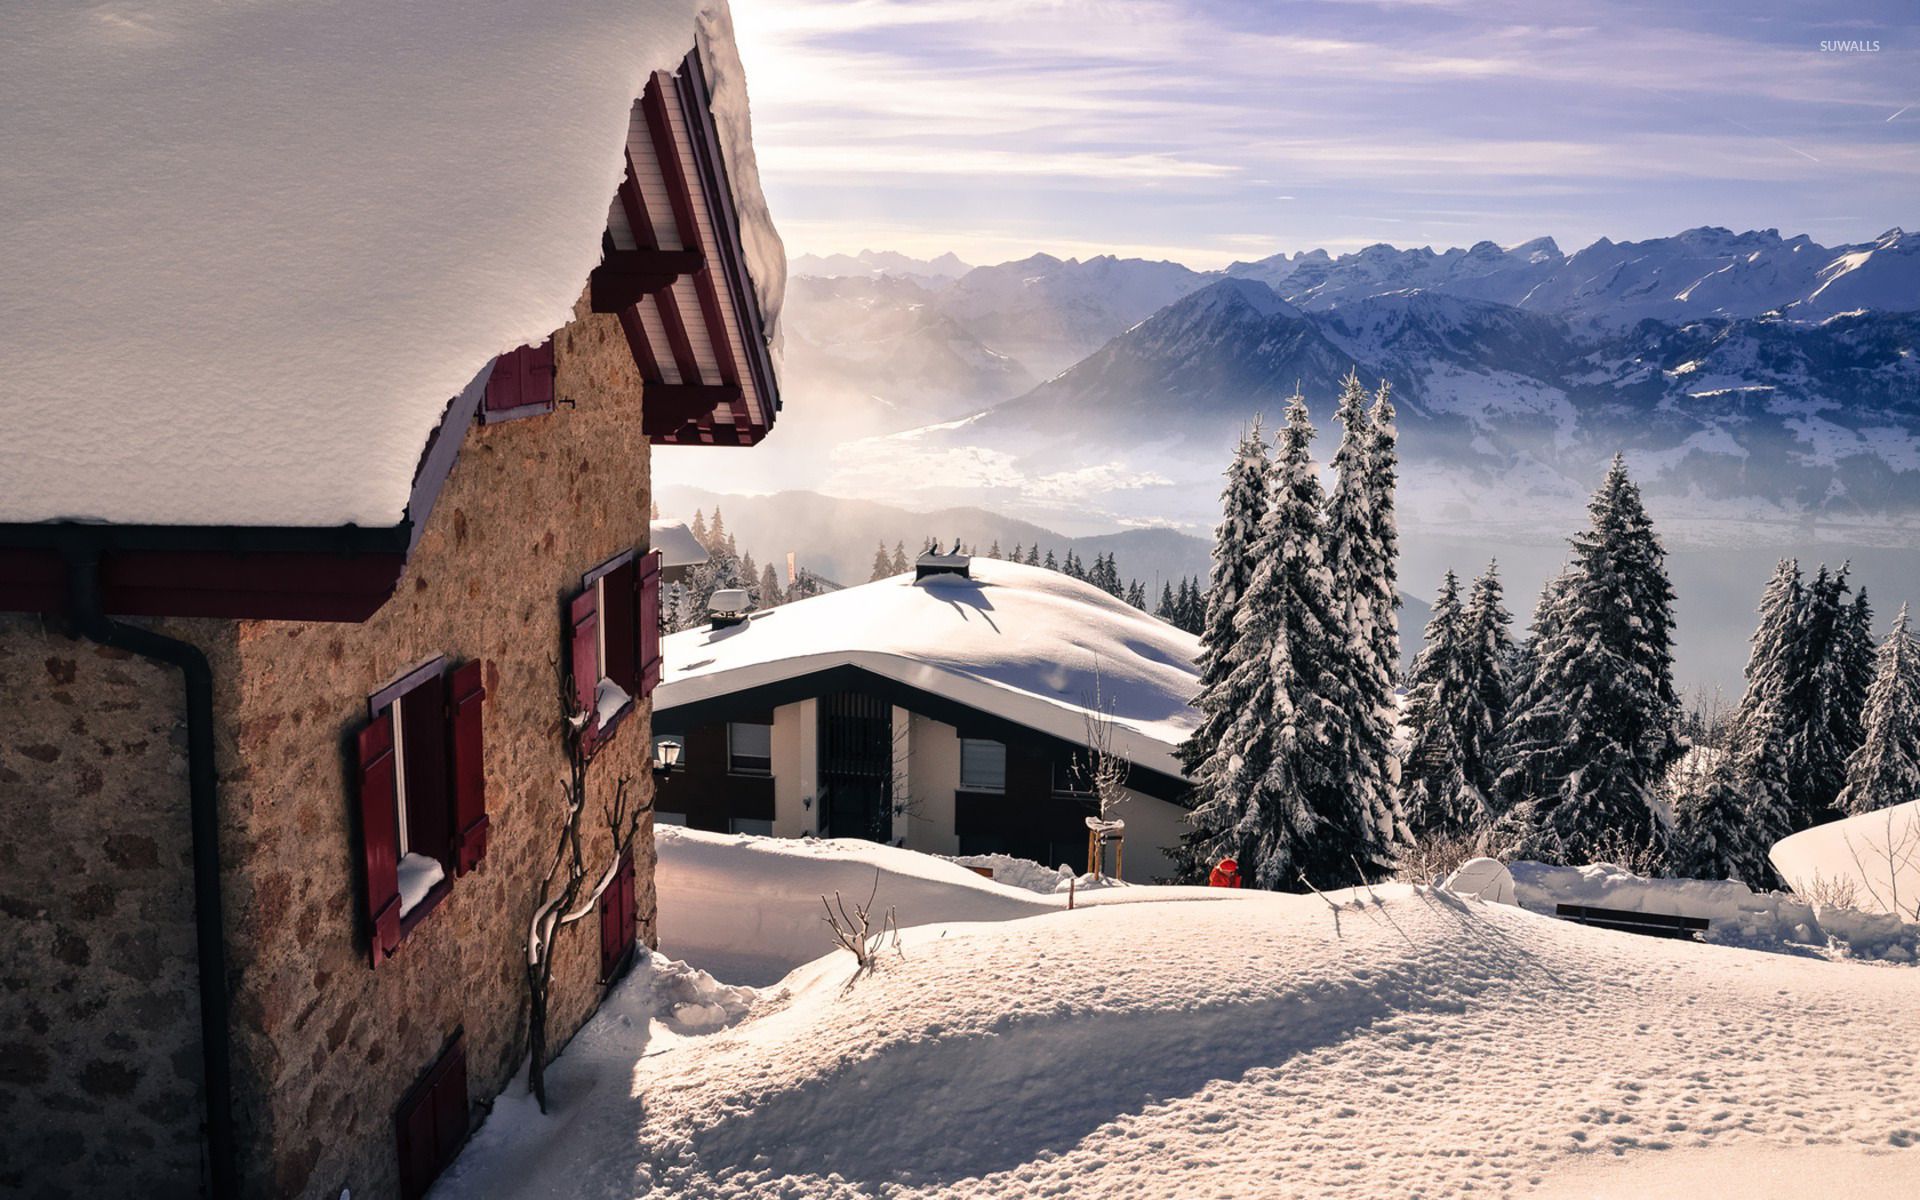 Holiday houses on a snowy mountain top wallpaper